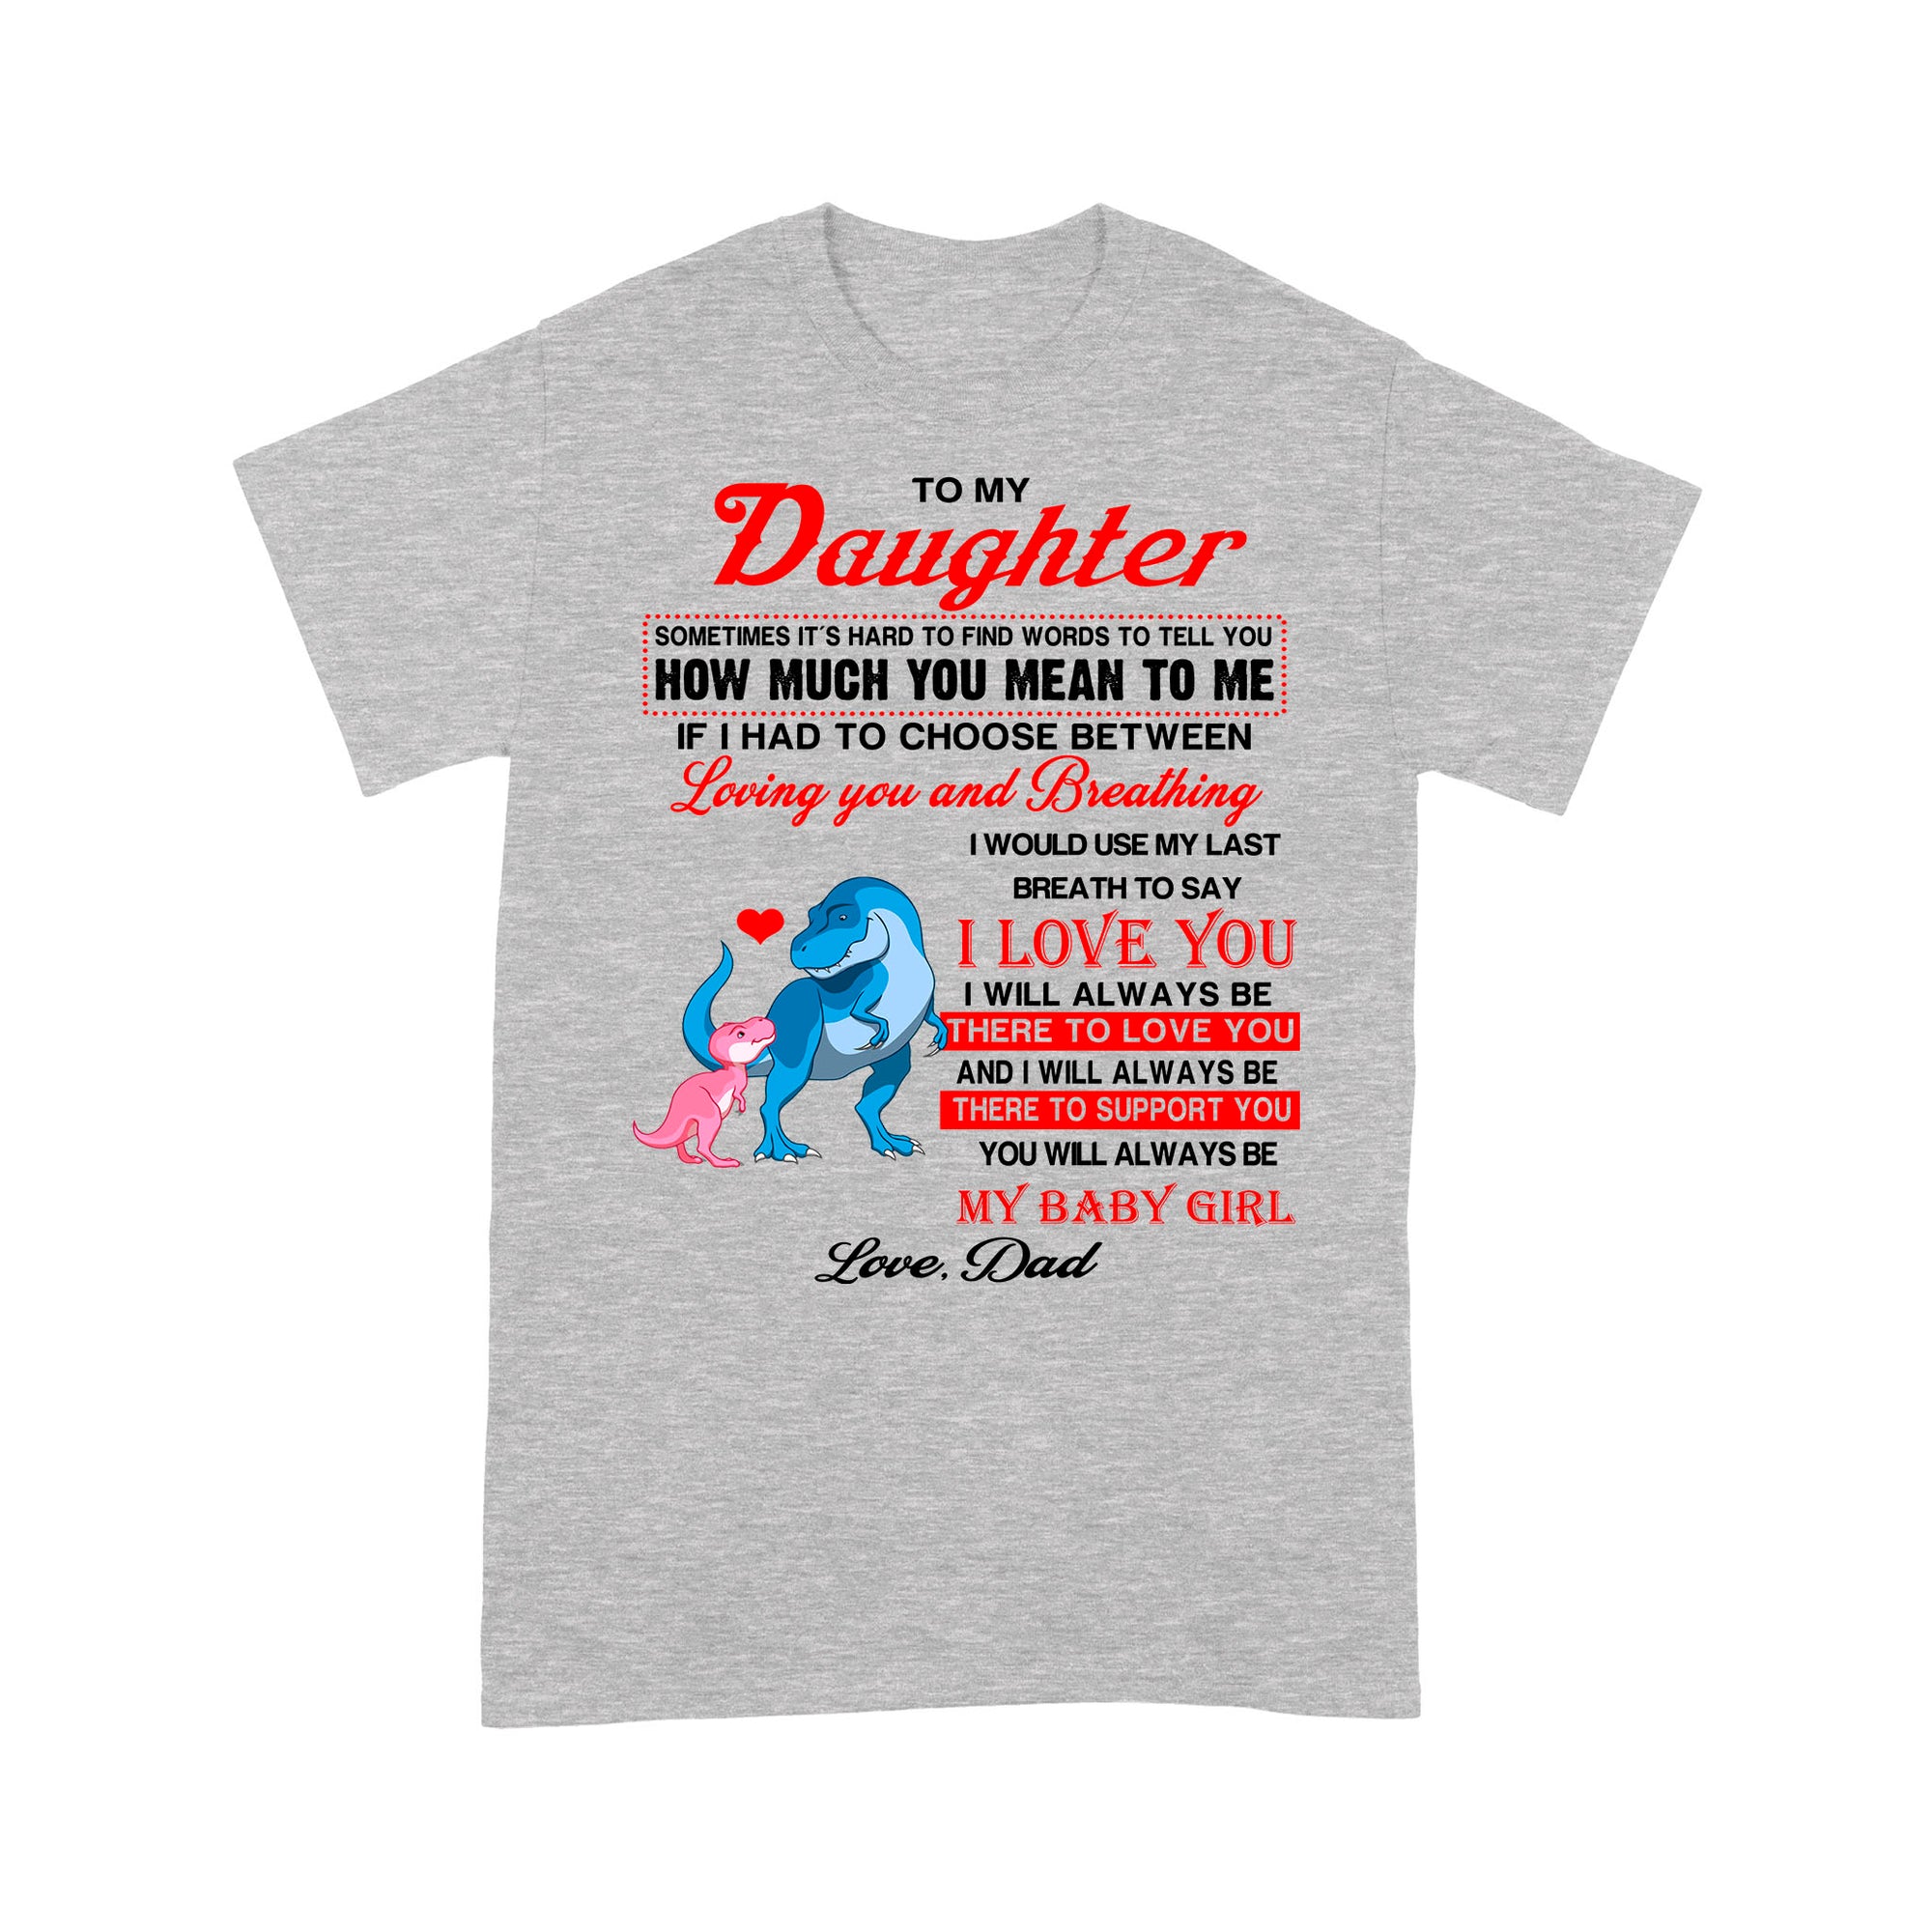 To My Daughter Sometimes It’s Hard To Find Words To Tell You How Much You Mean To Me, Dadysaurus - Standard T-Shirt